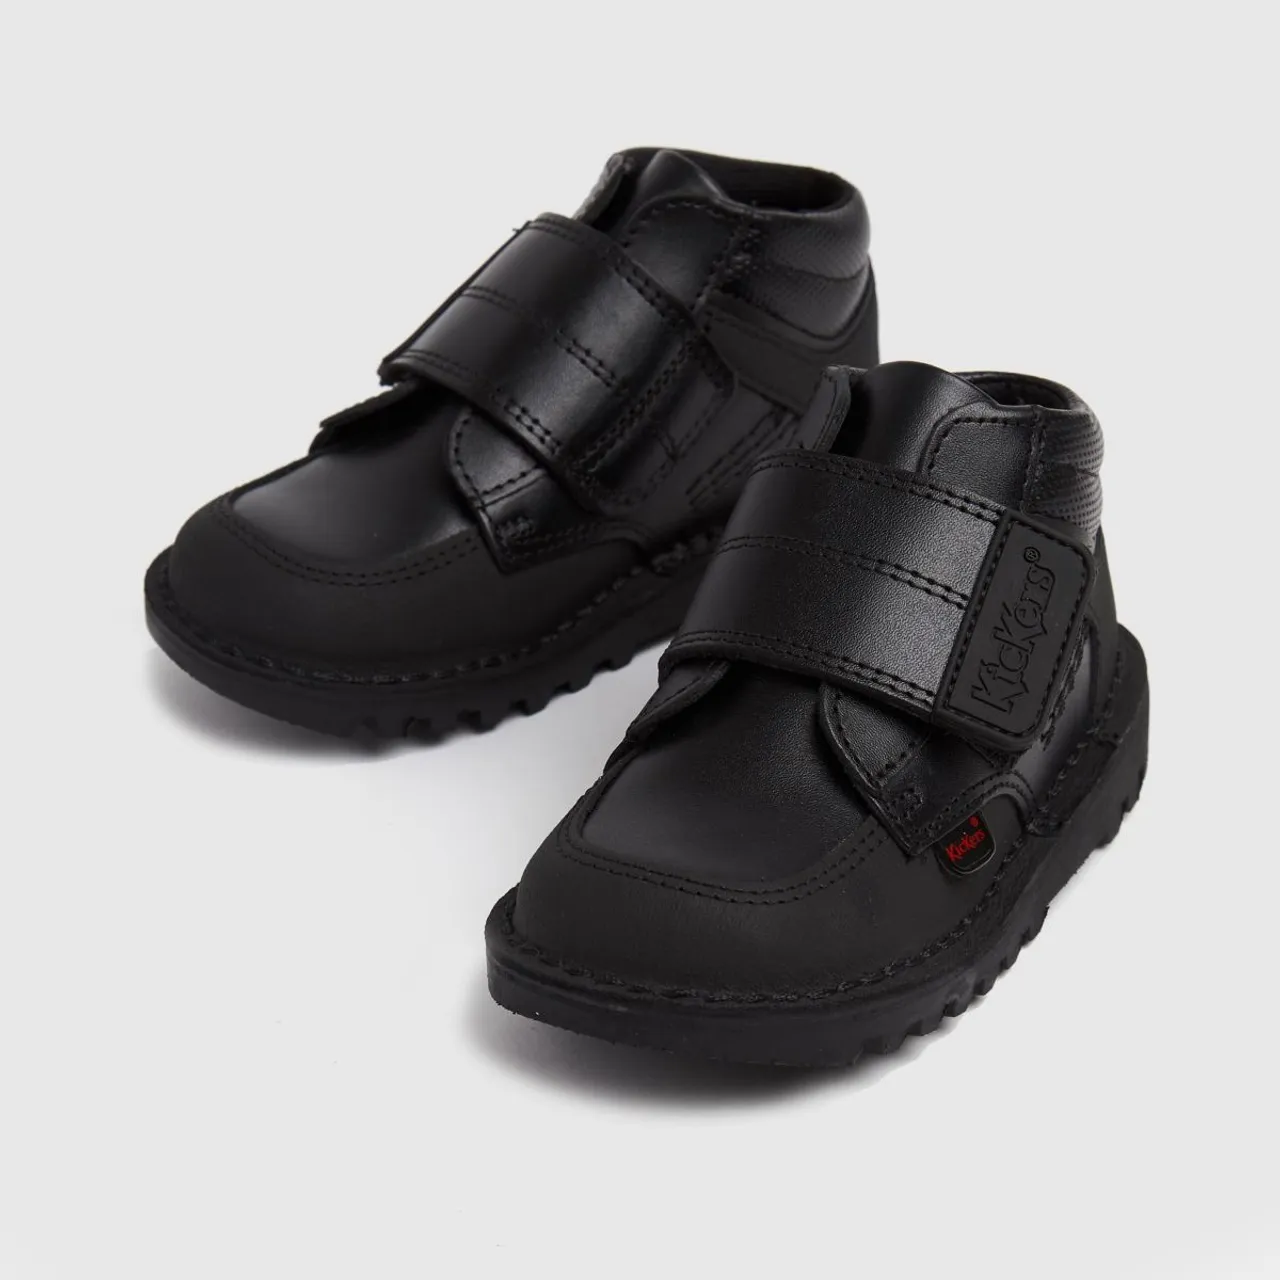 Kickers Black Mid Scuff Boys Toddler Boots